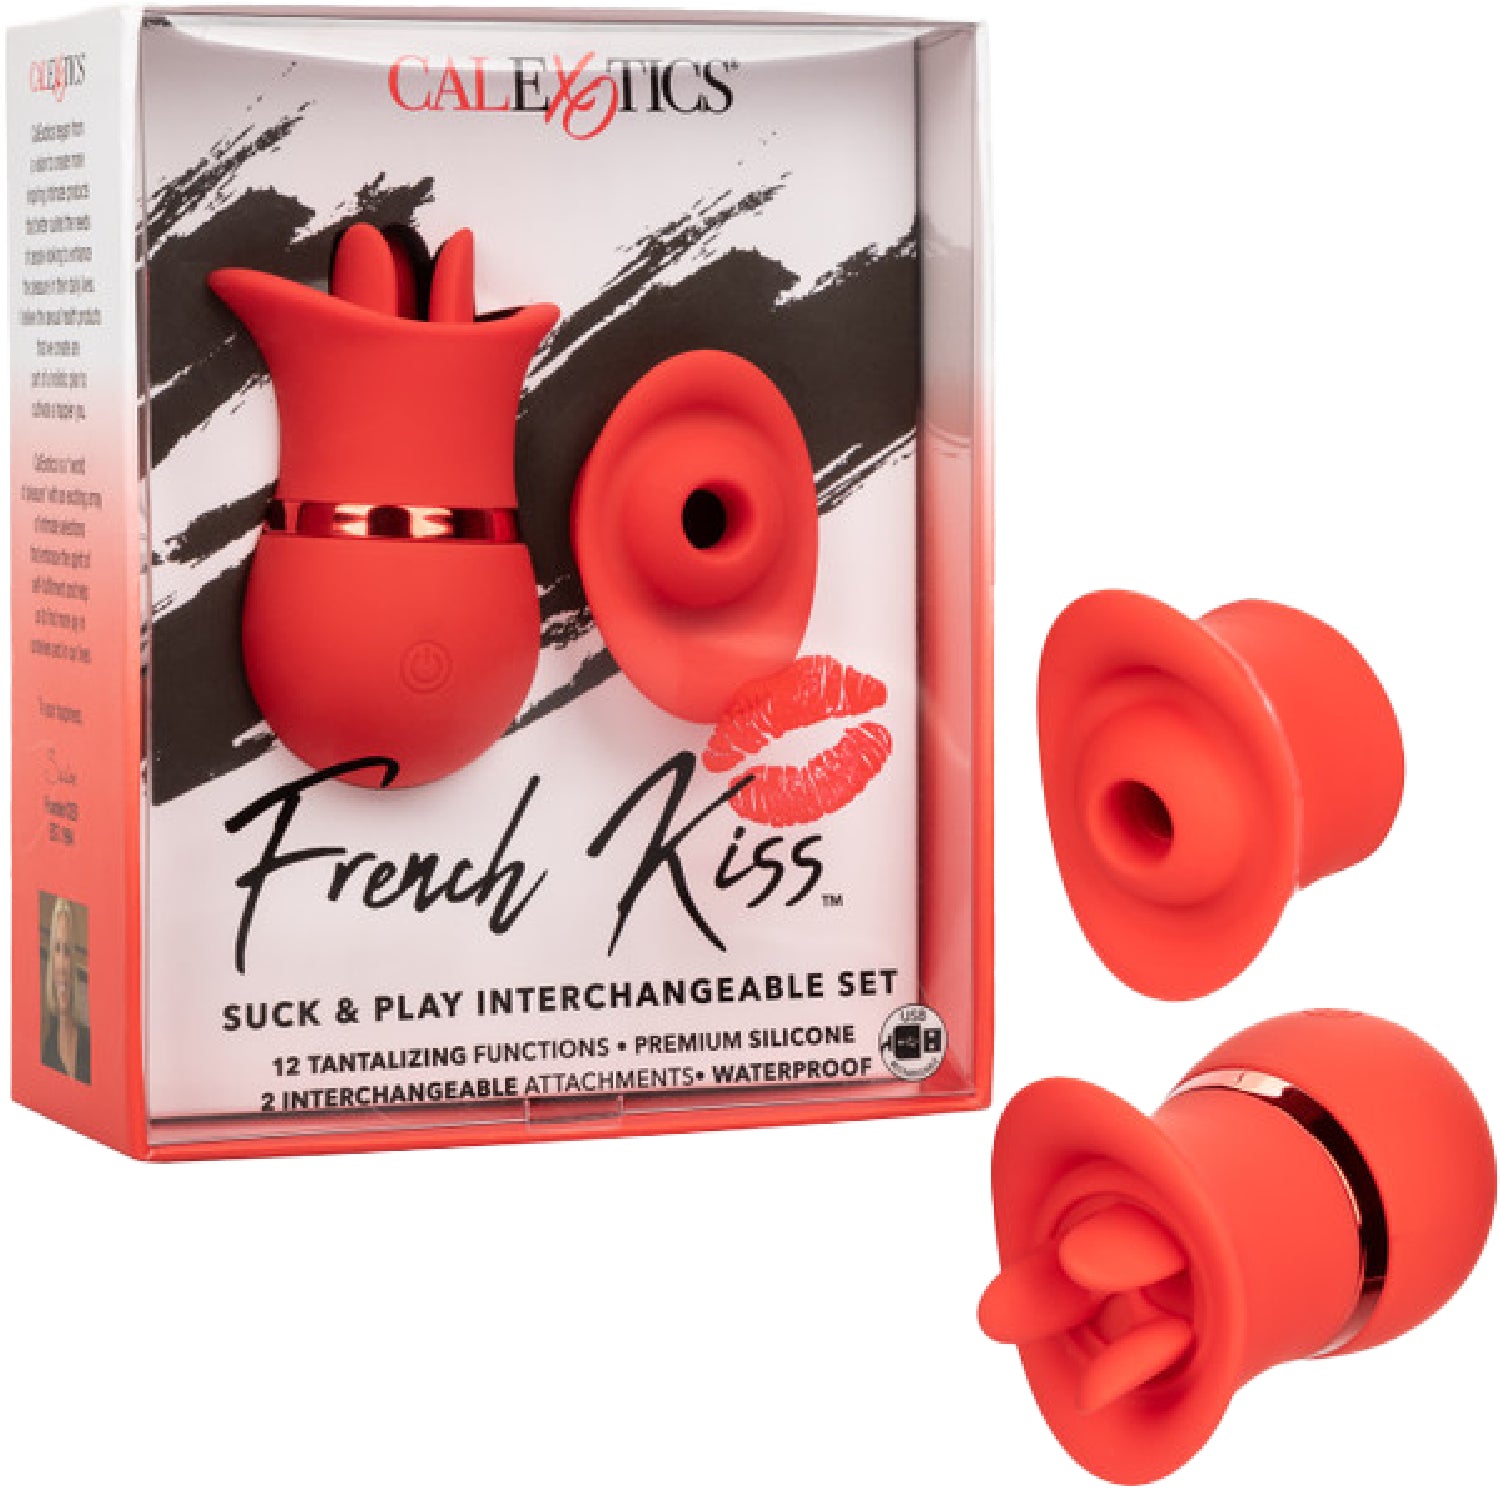 French Kiss - Suck &amp; Play Interchangeable Set - Red